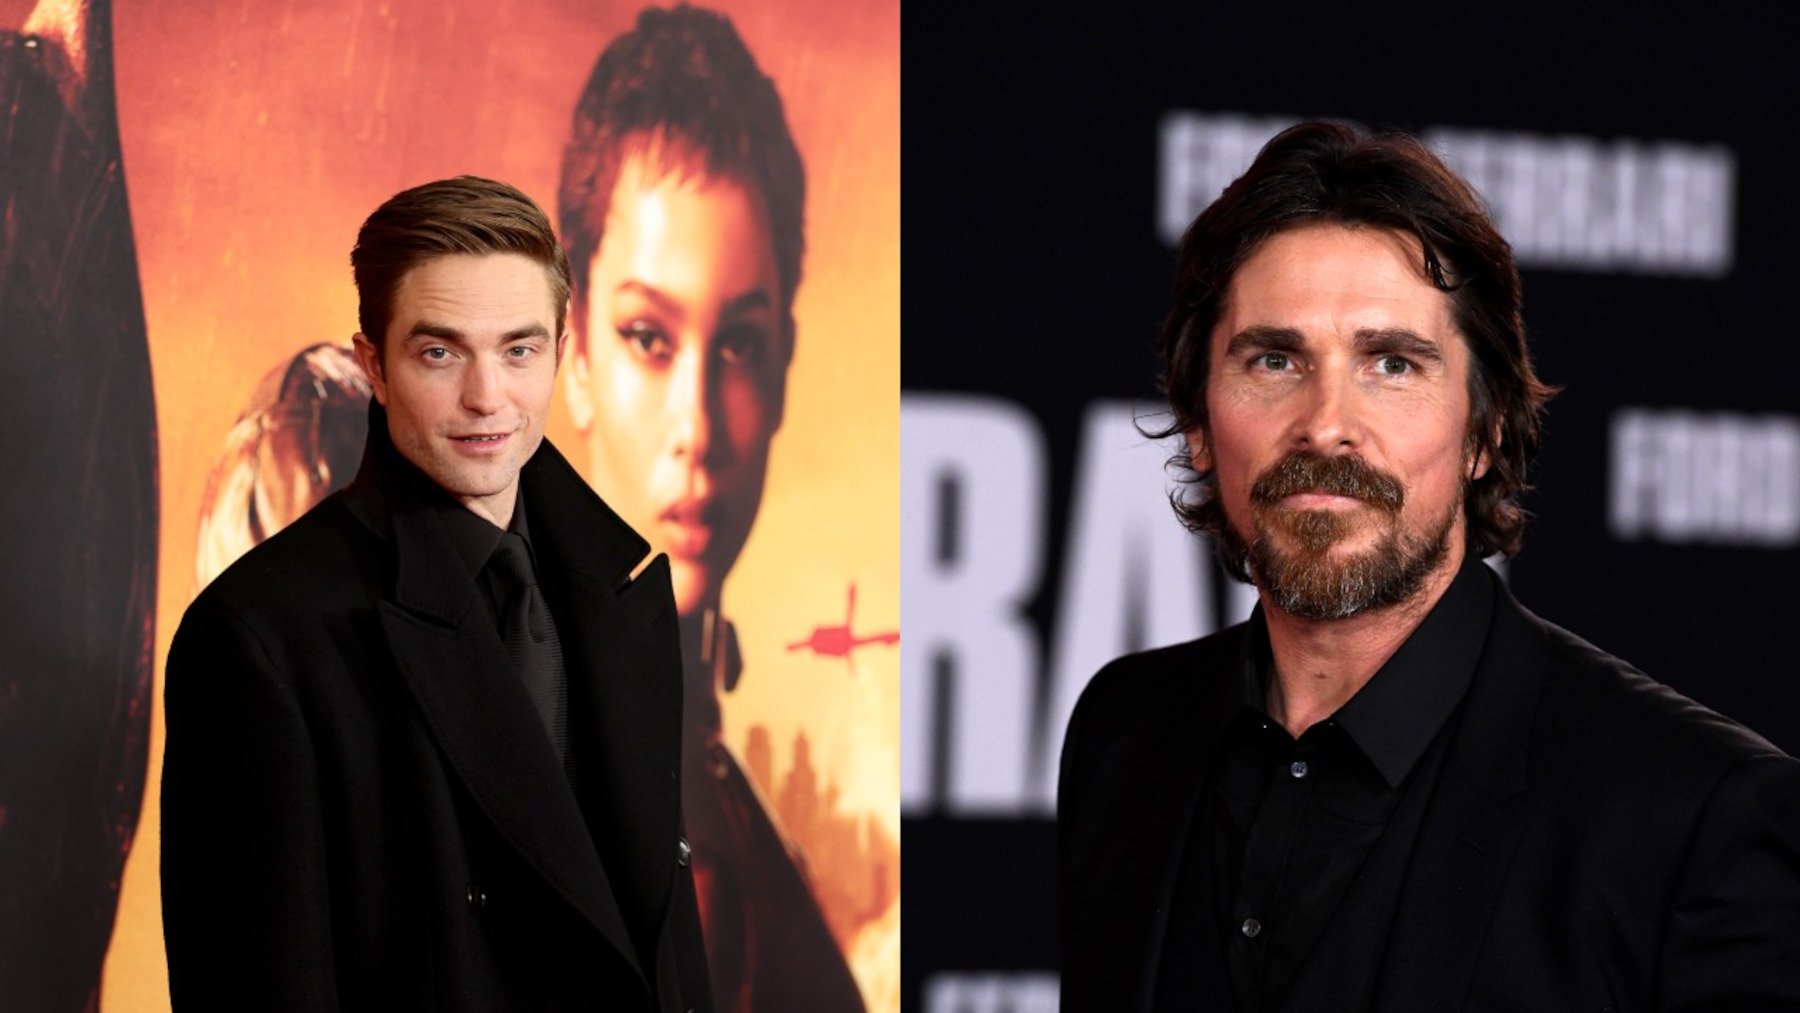 Left: A photo of Robert Pattinson wearing a black suit and standing in front of a promotional image for 'The Batman.' On the right: Christian Bale wearing a black shirt and smiling.